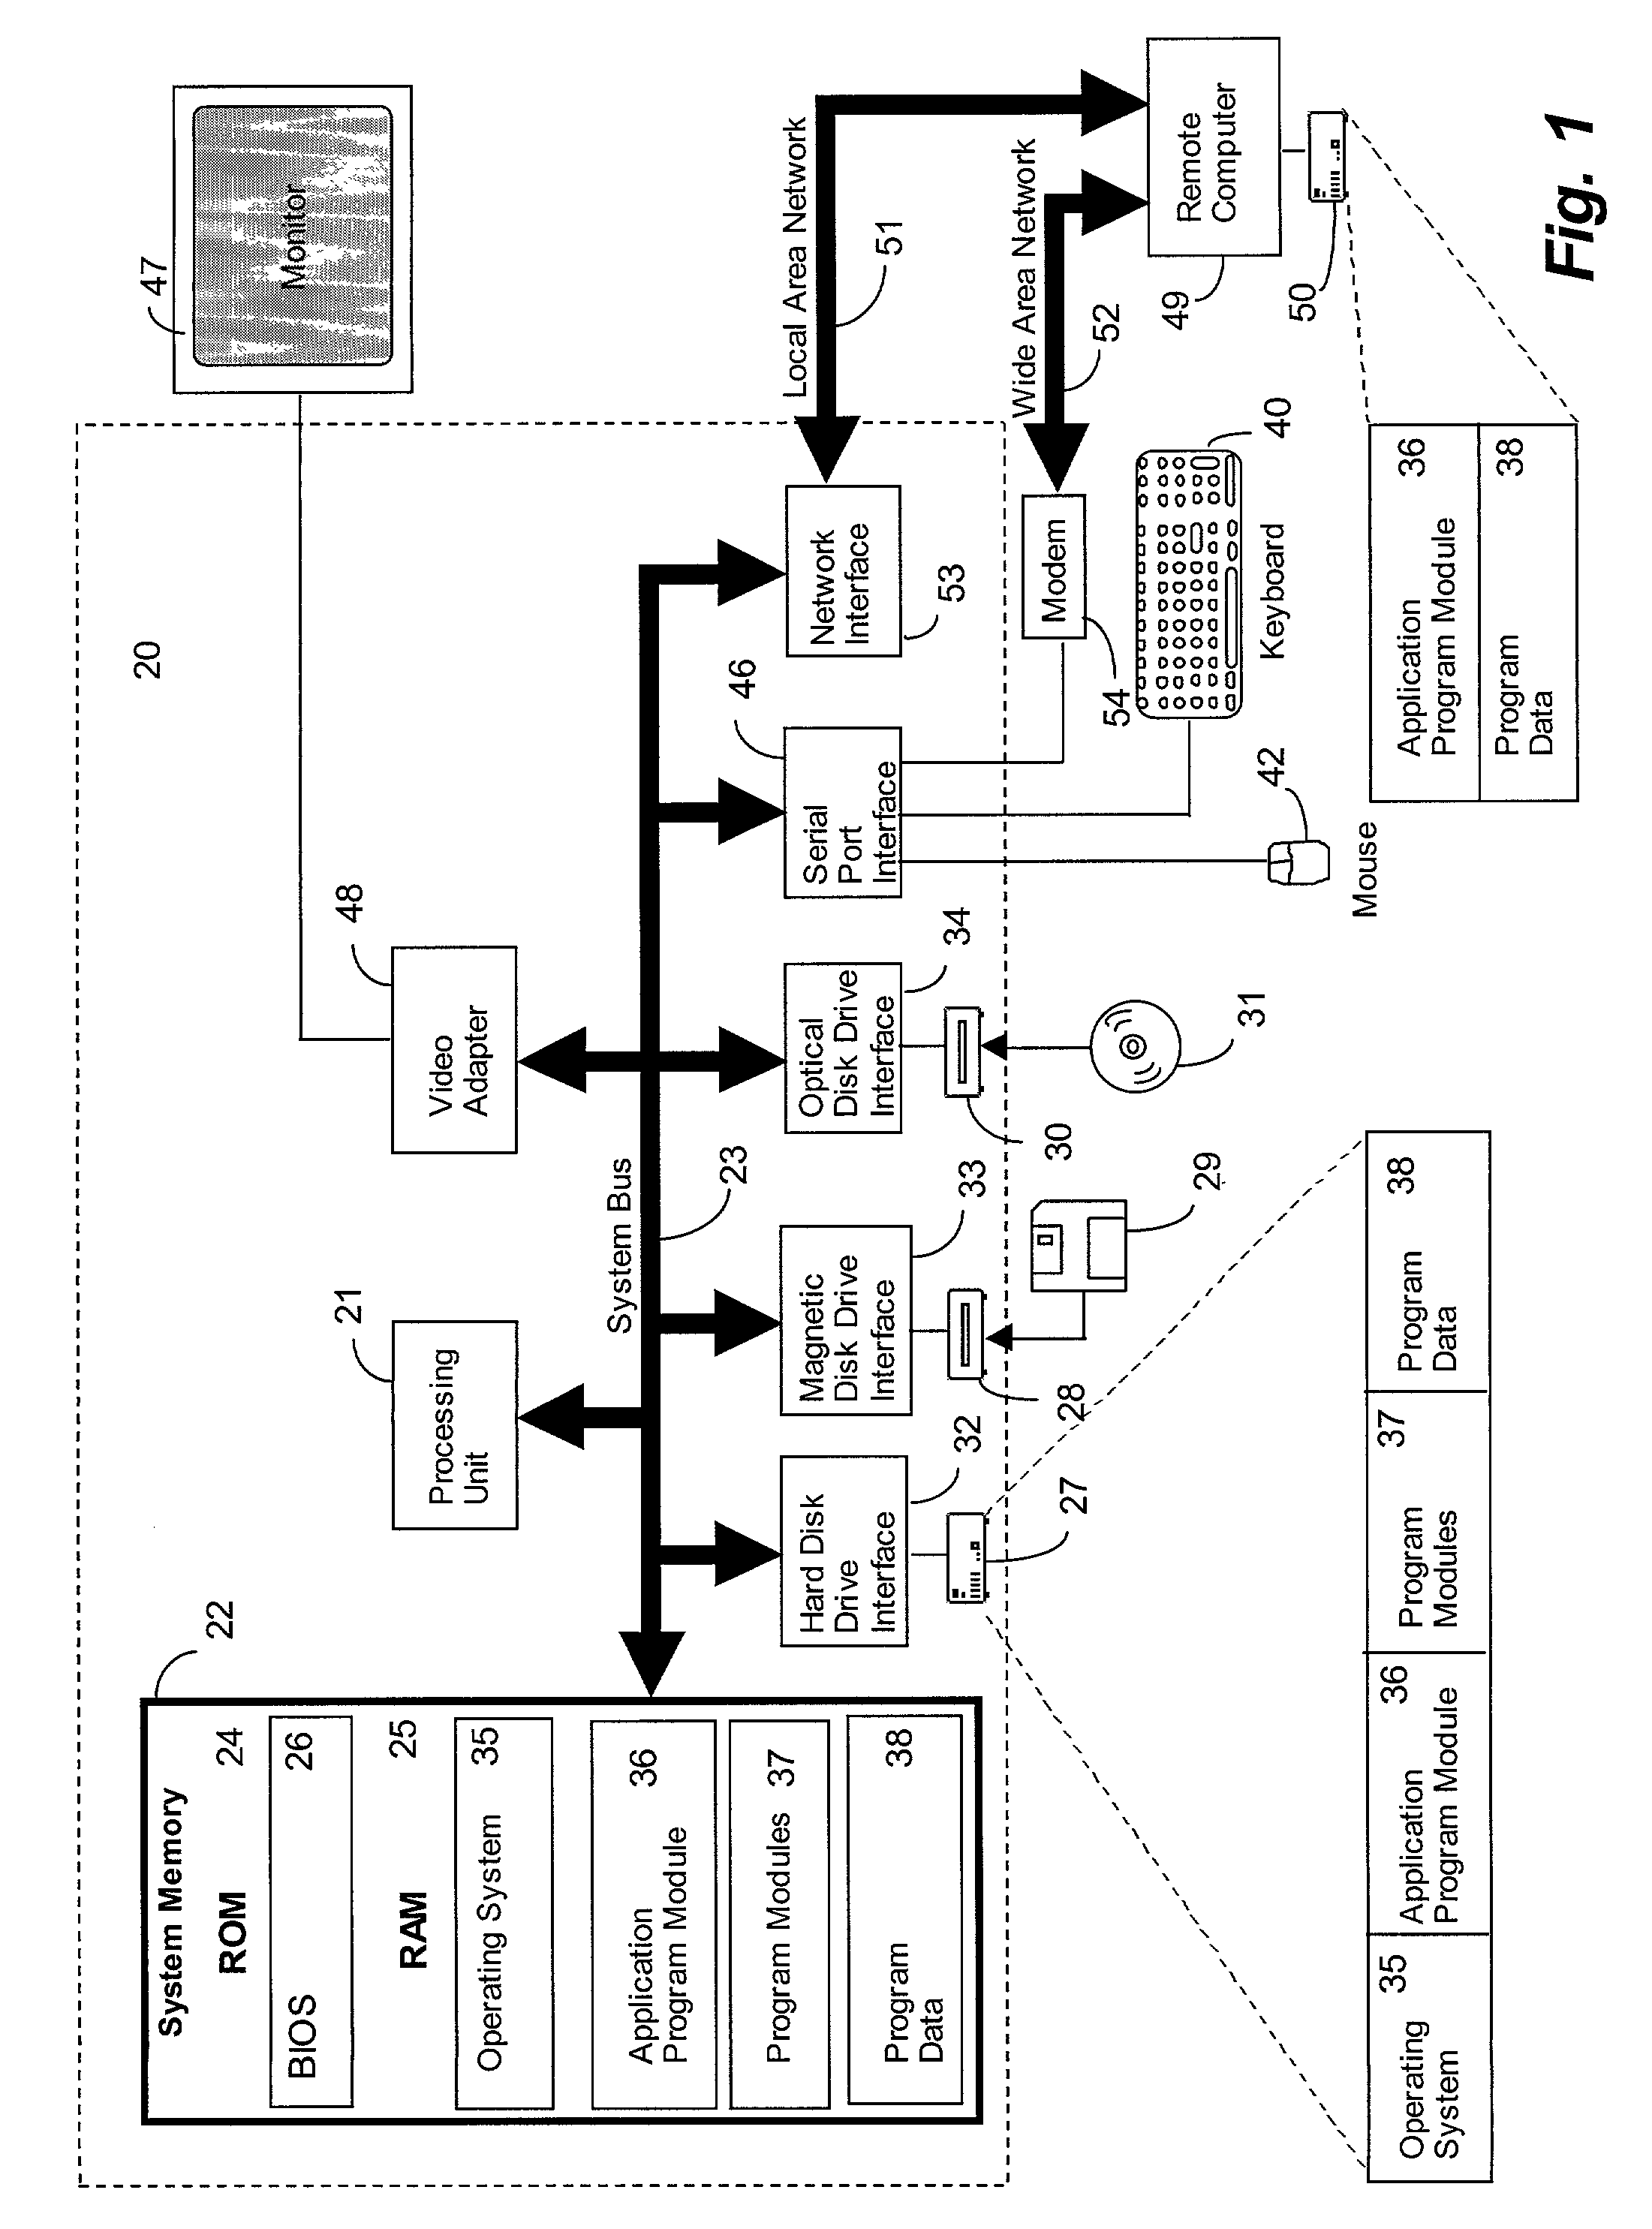 Method and system for applying input mode bias